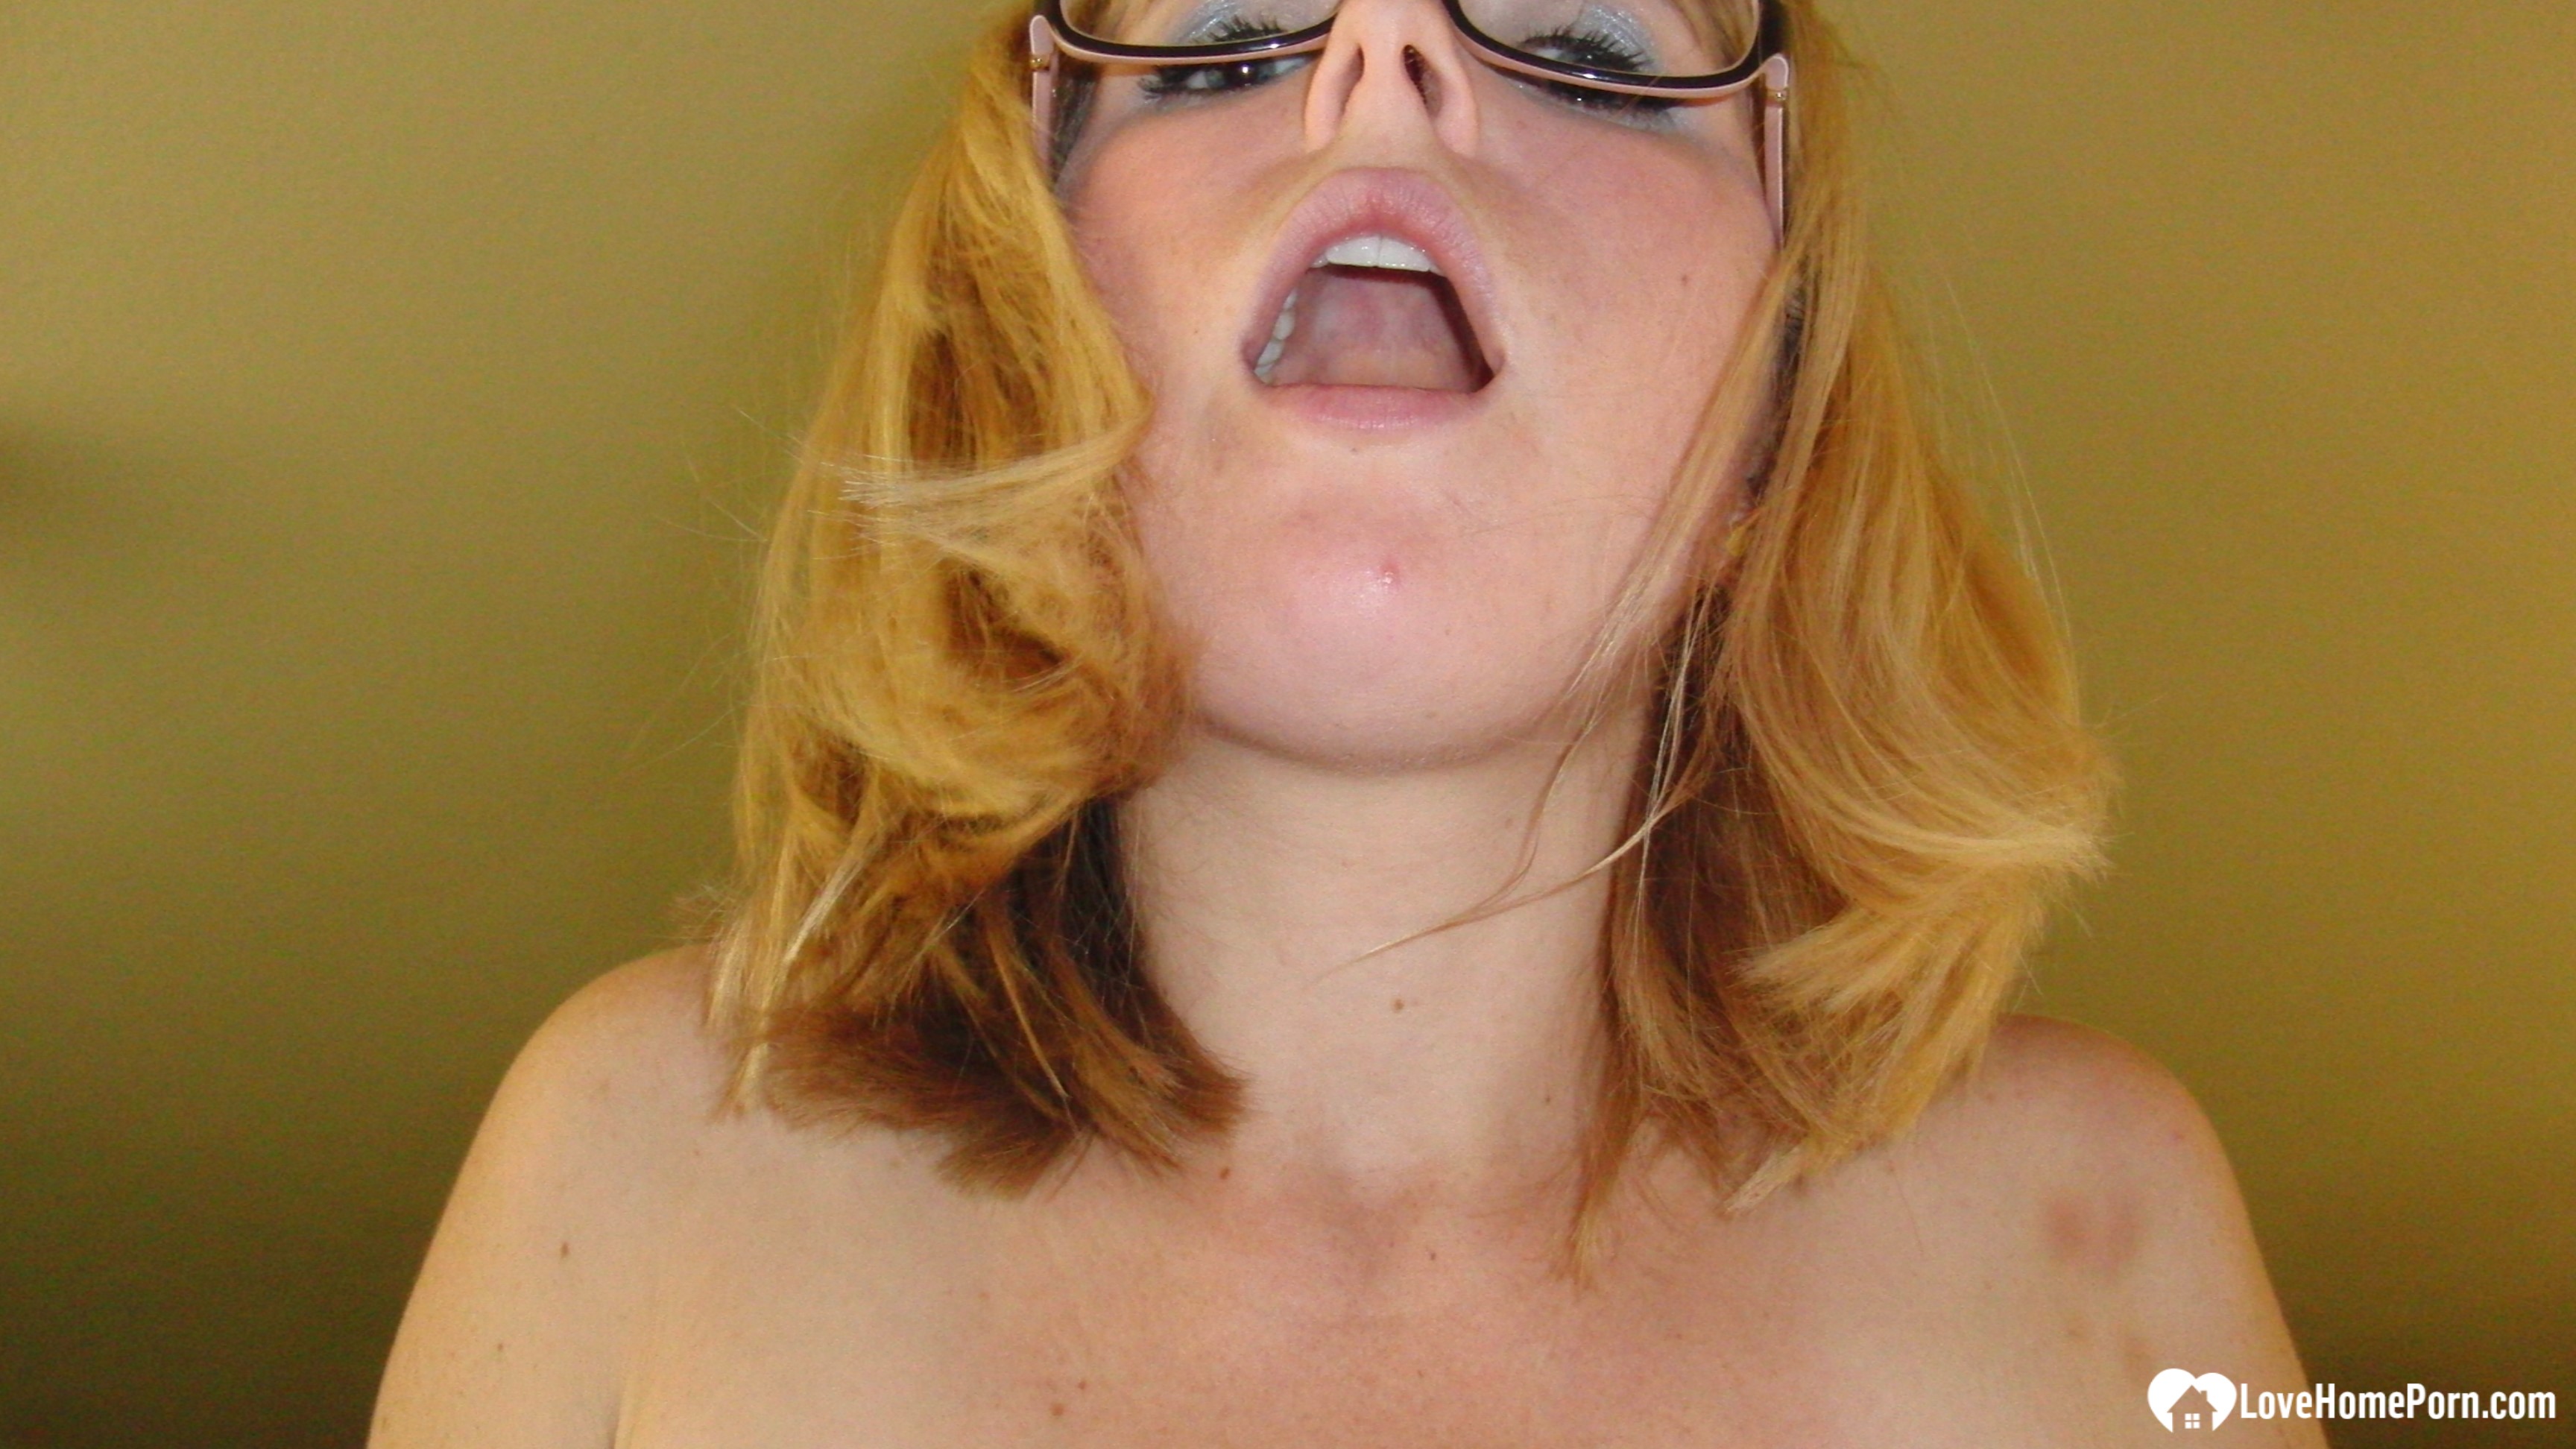 Blonde with glasses knows how to suck dick